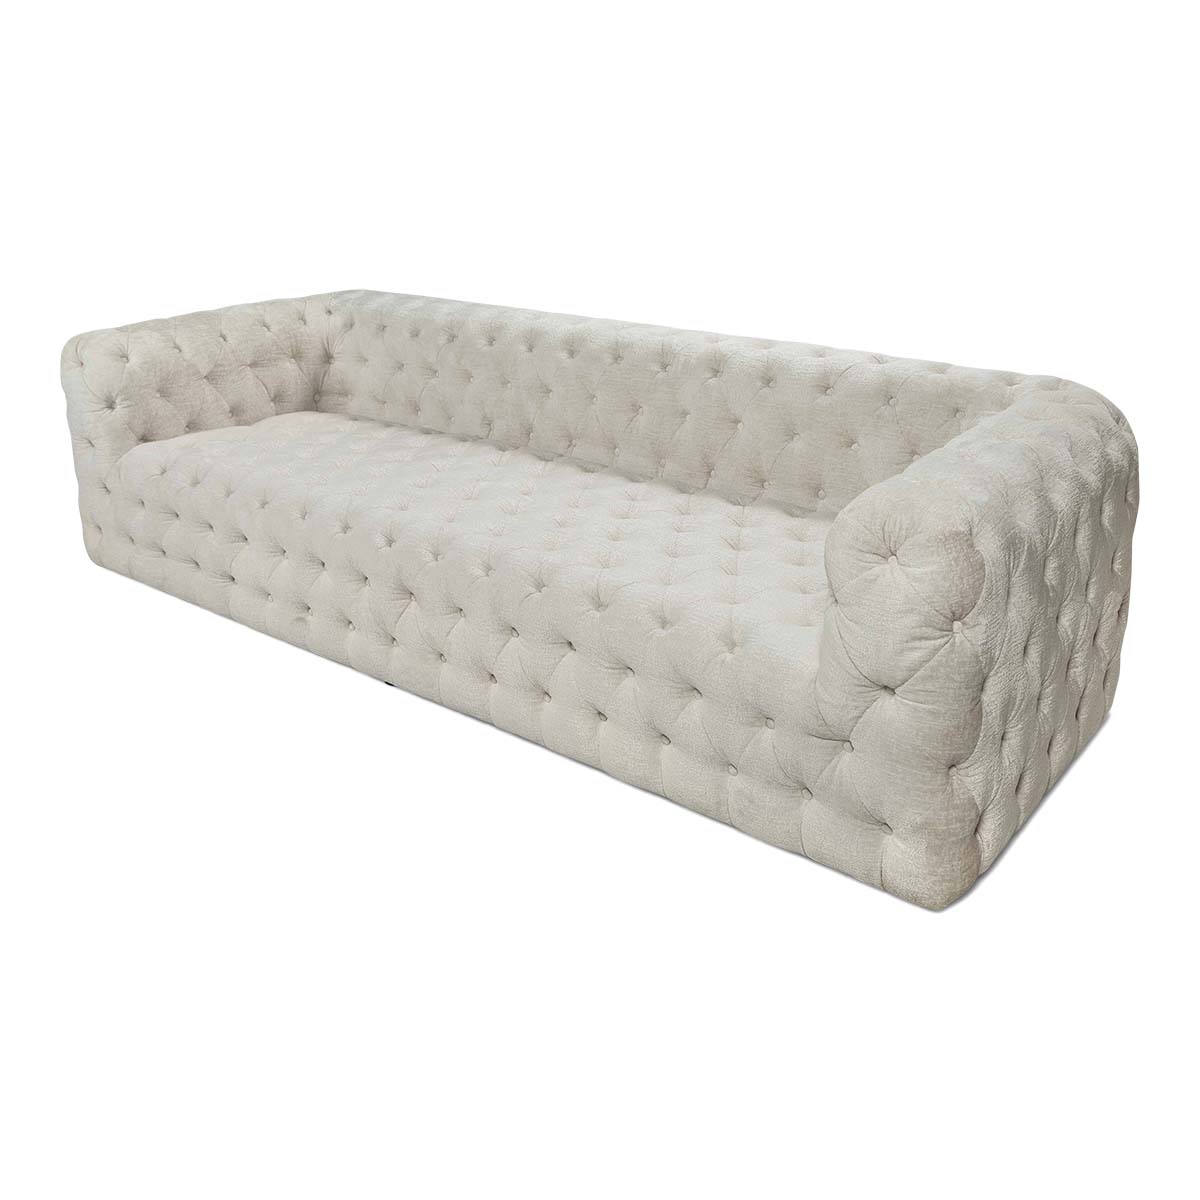 Palm Beach Sofa in Poodle